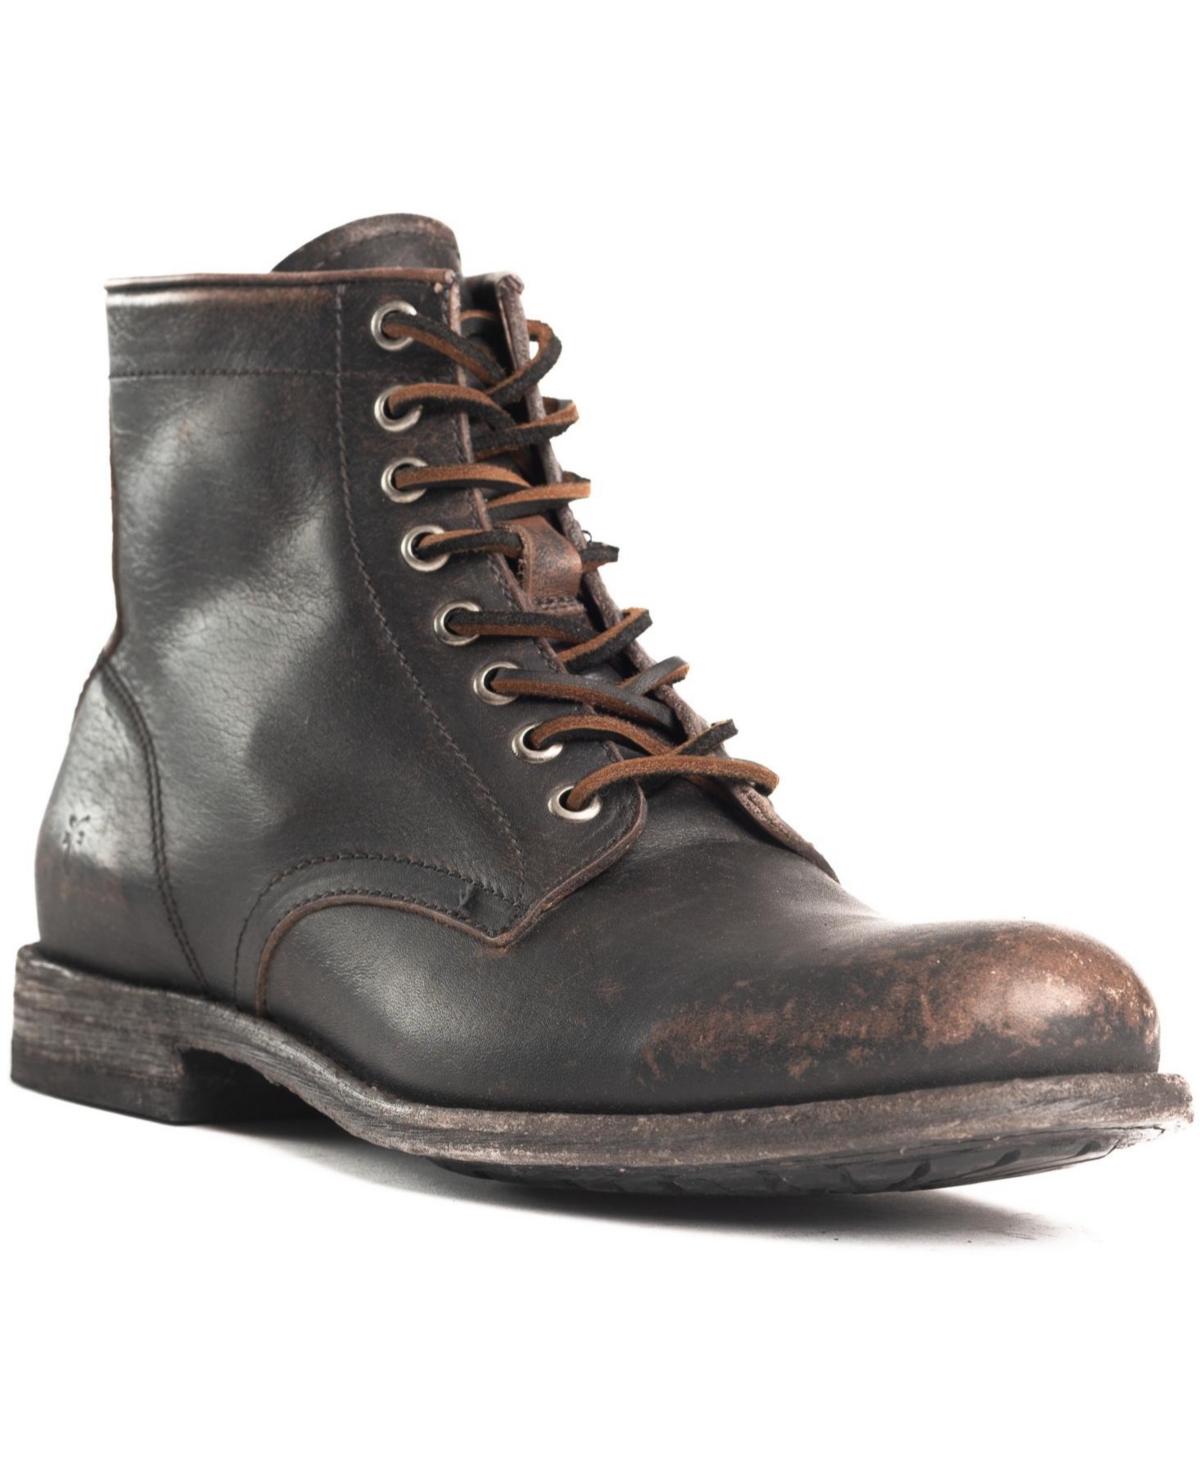 Men's Tyler Lace-up Boots - Black Distressed Leather